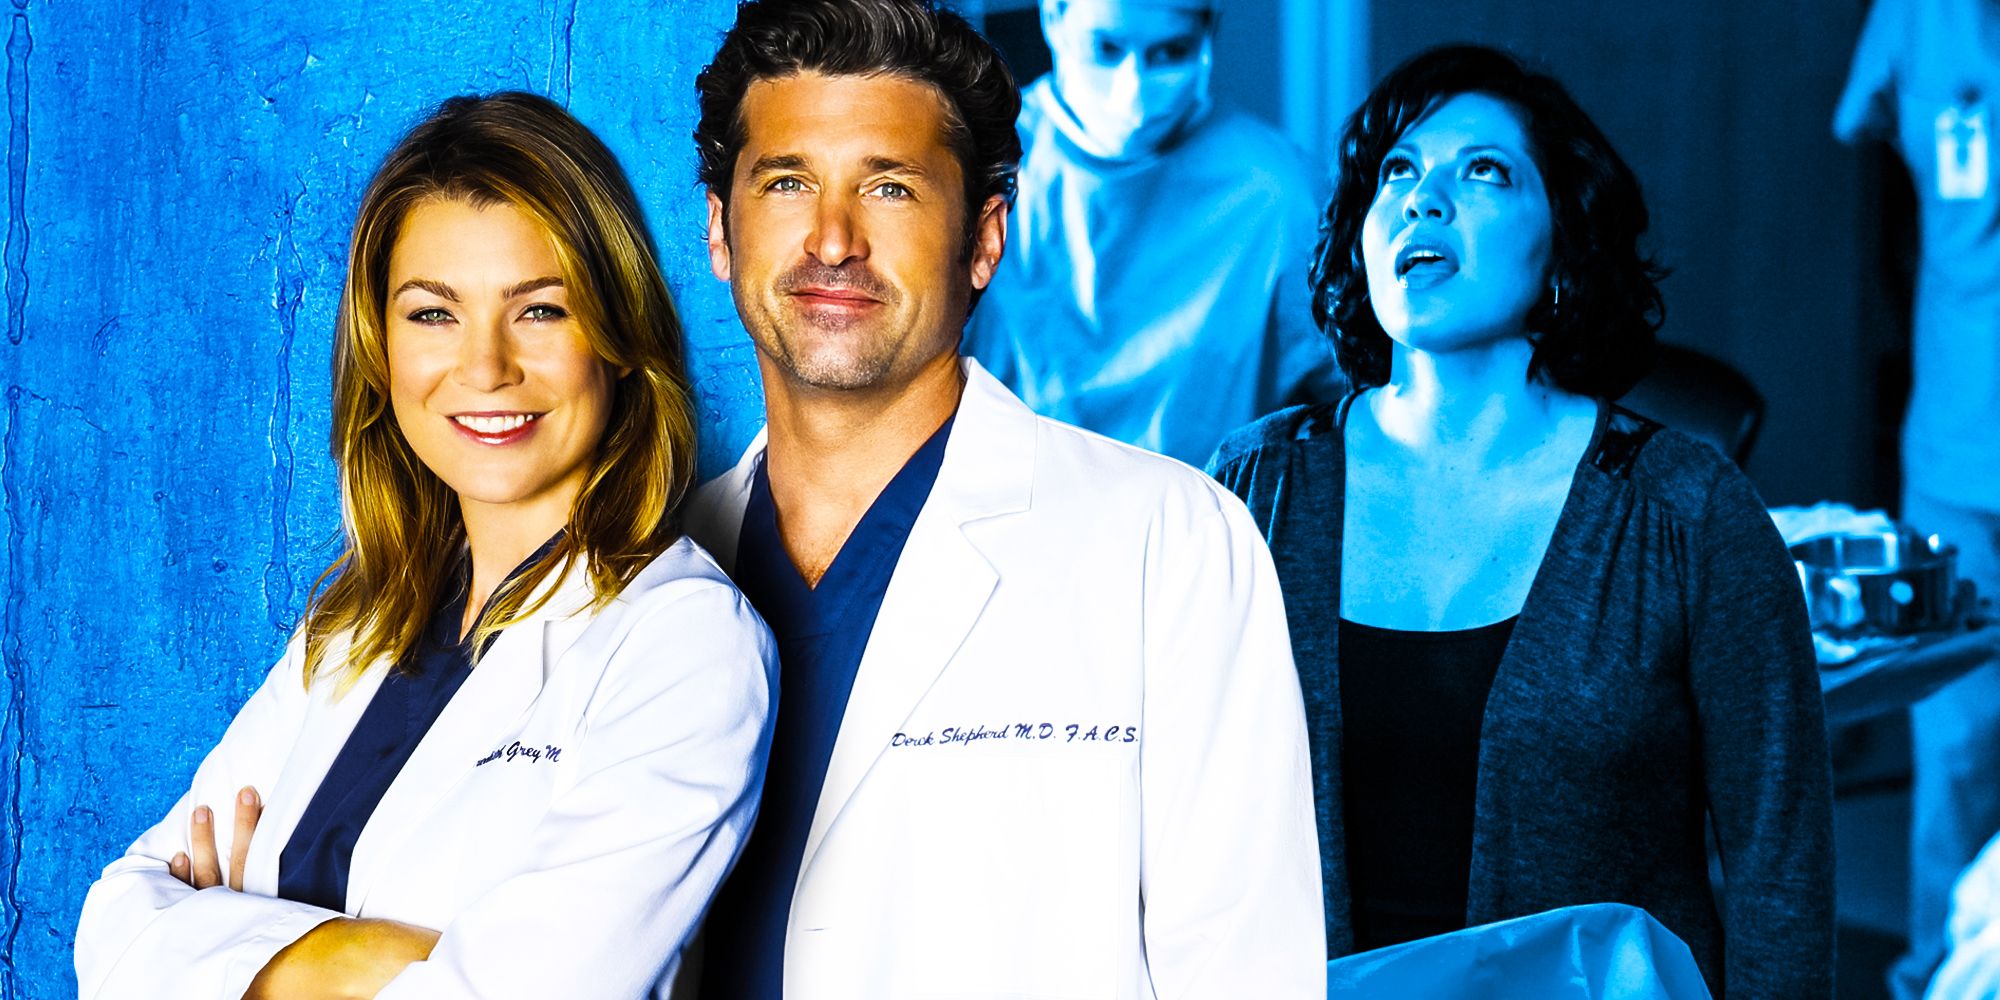 Greys anatomy Ellen Pompeo and Patrick Dempsey Hated the musical episode